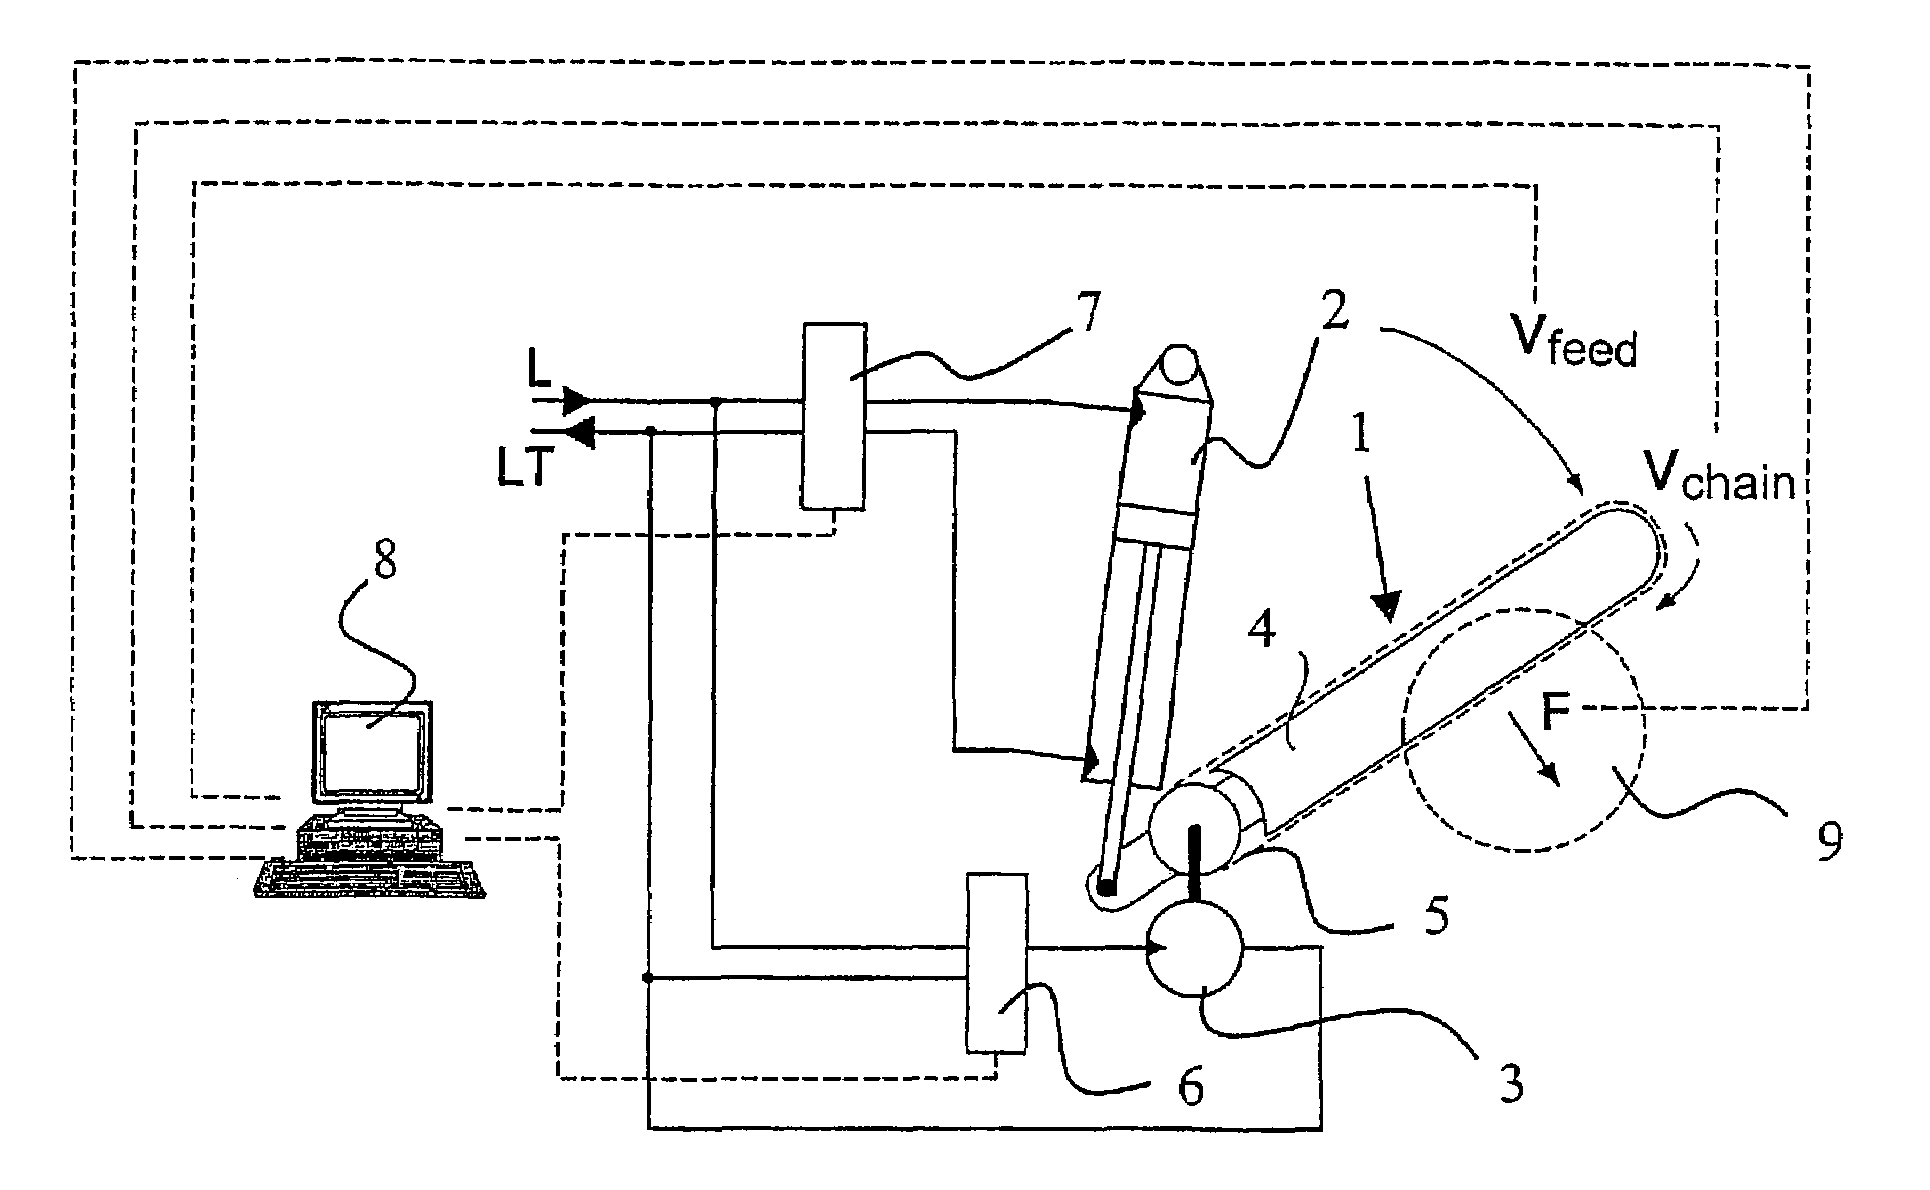 Method and arrangement for adjusting feed rate of a crosscut saw